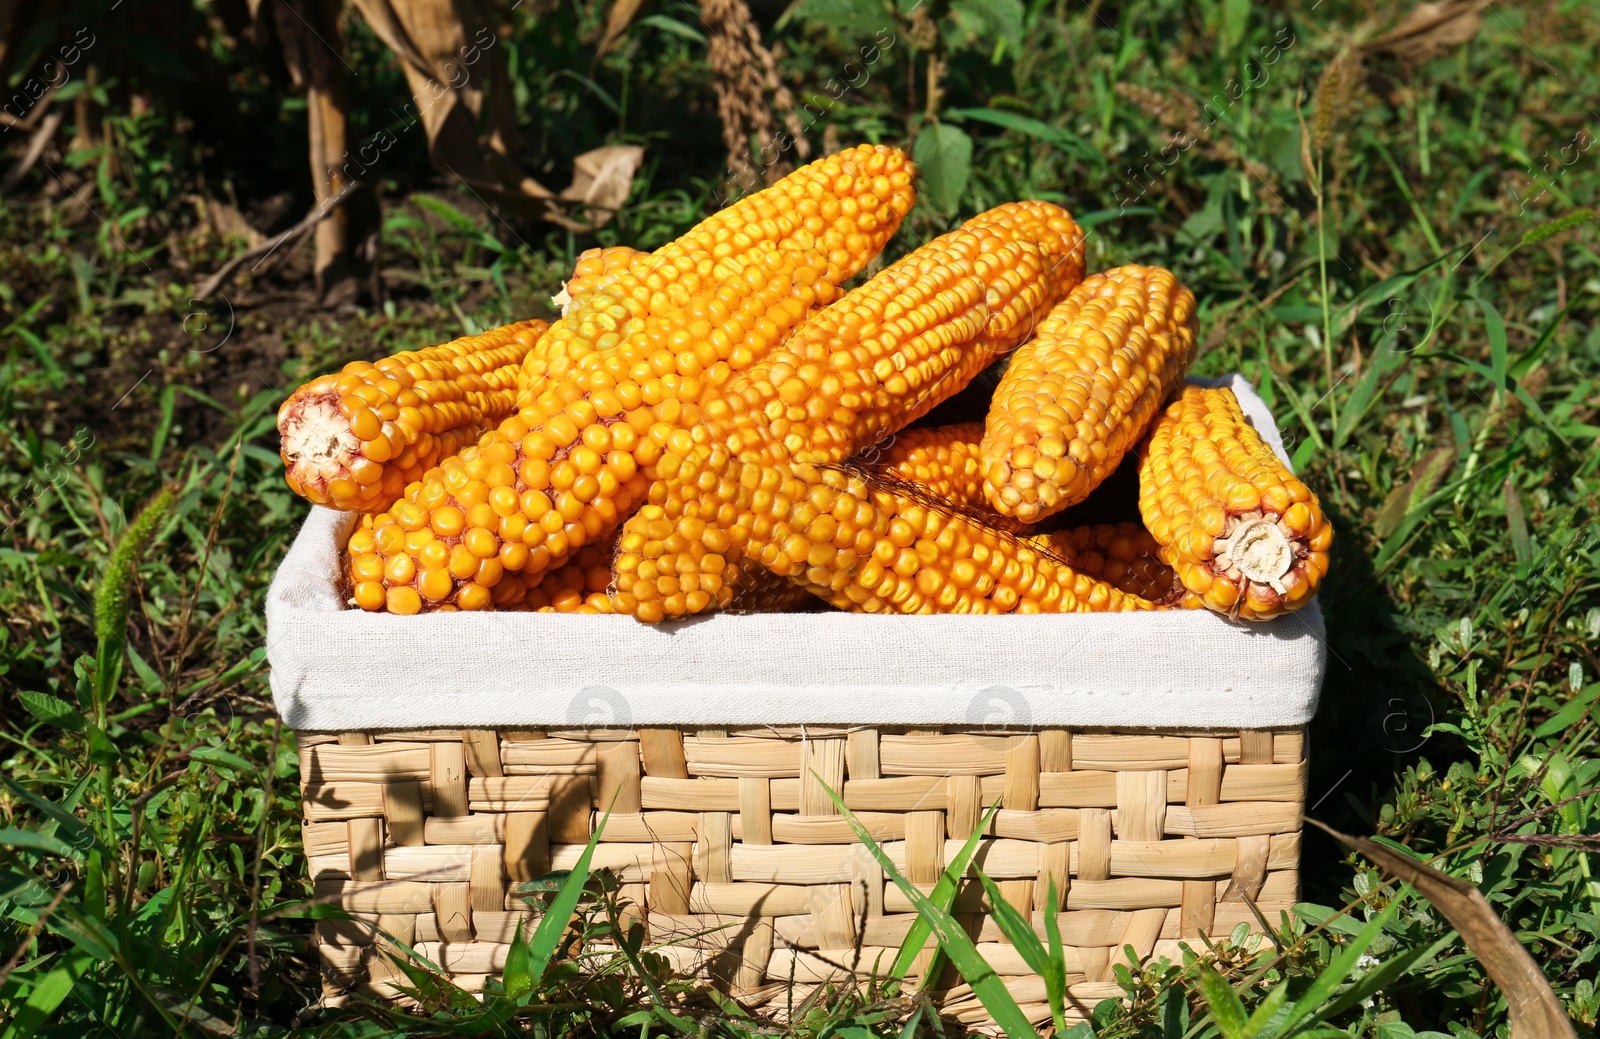 Photo of Delicious ripe corn cobs in wicker basket on green grass outdoors